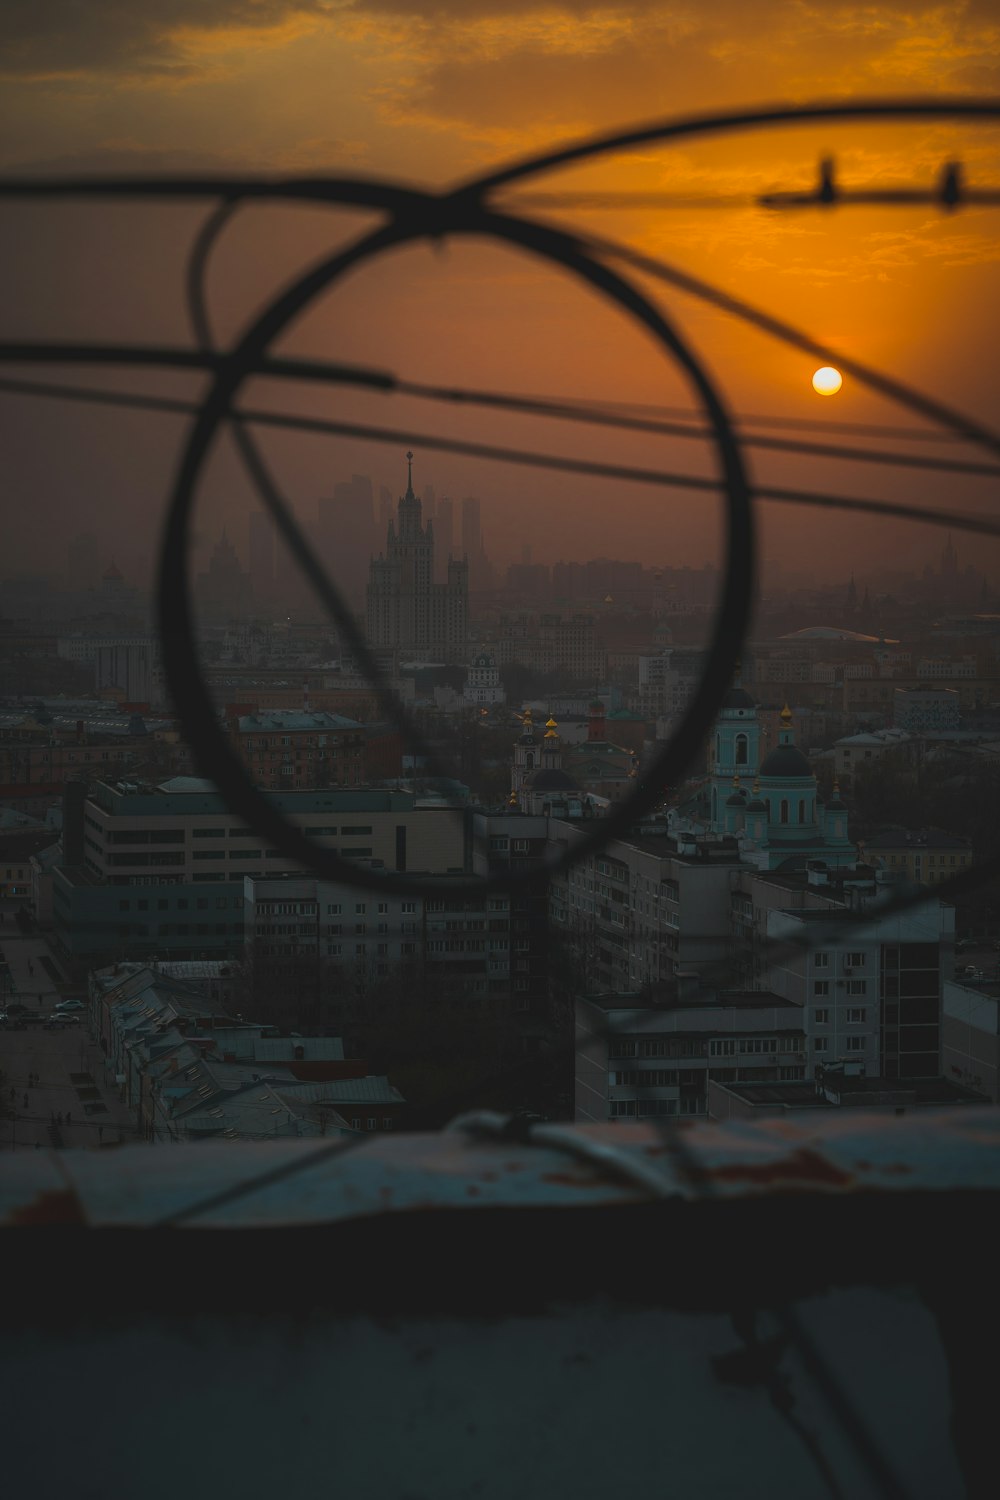 the sun is setting over a city with buildings